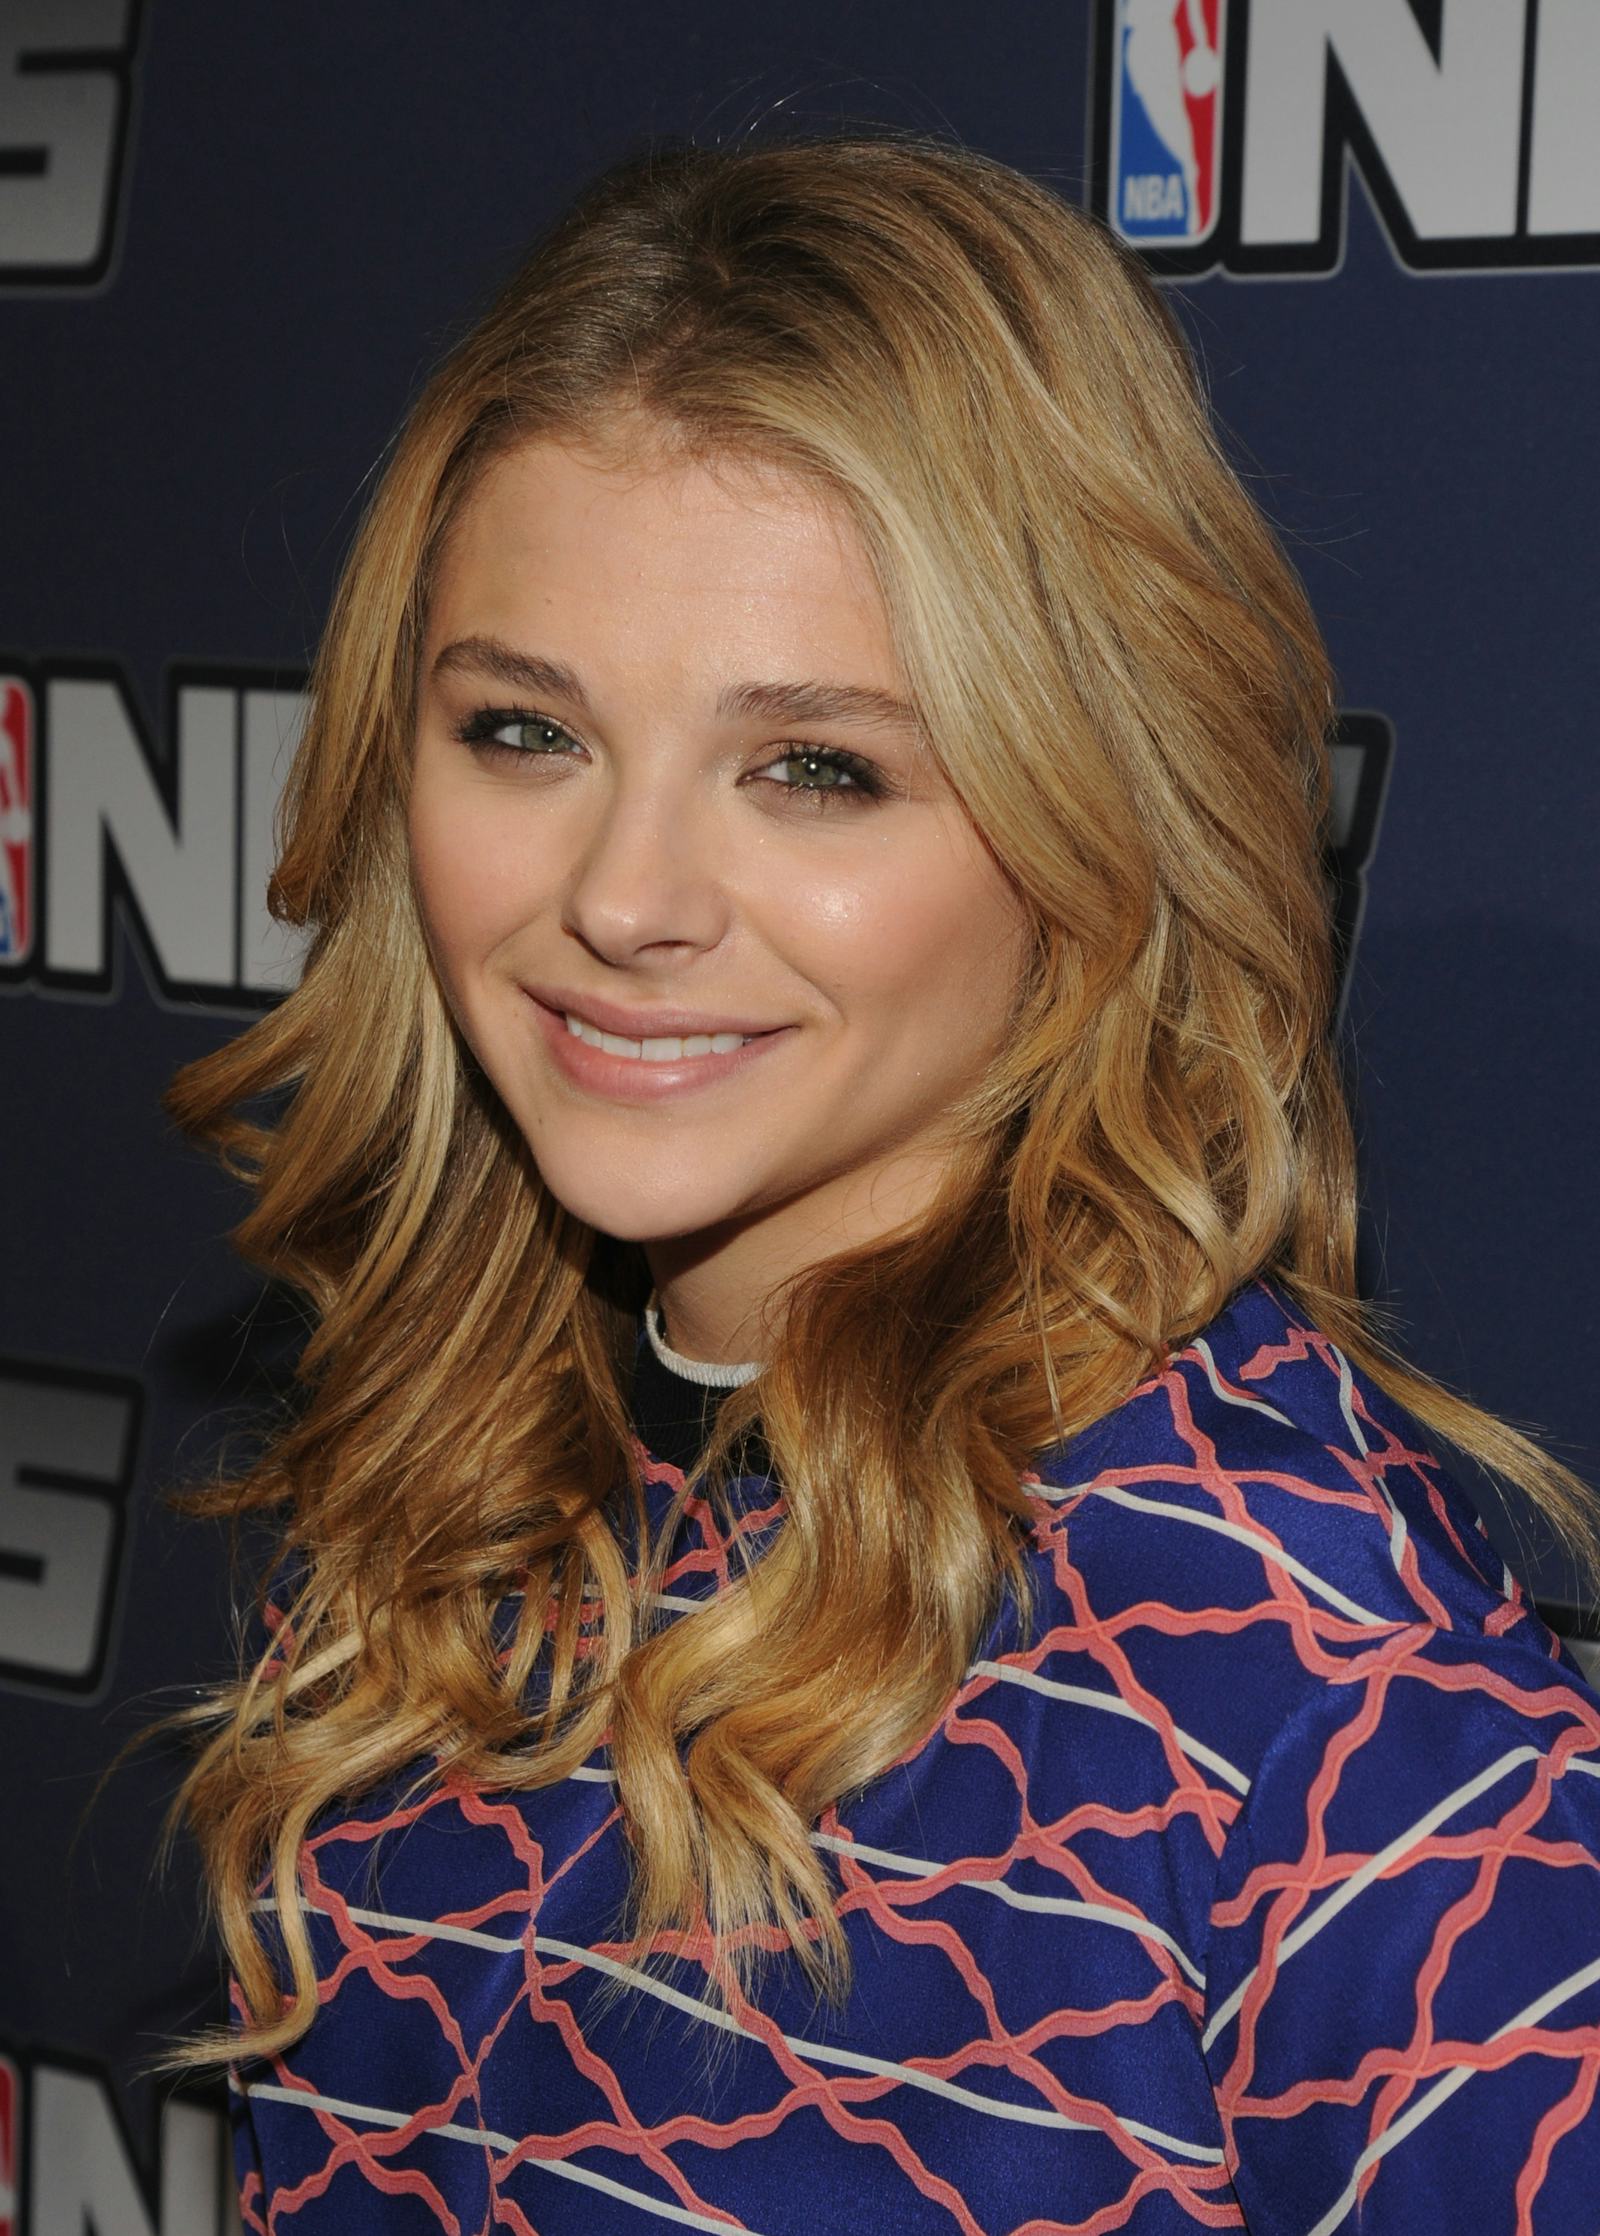 Chloe Grace Moretz Walks The Talk When It Comes To Her Views On Feminism